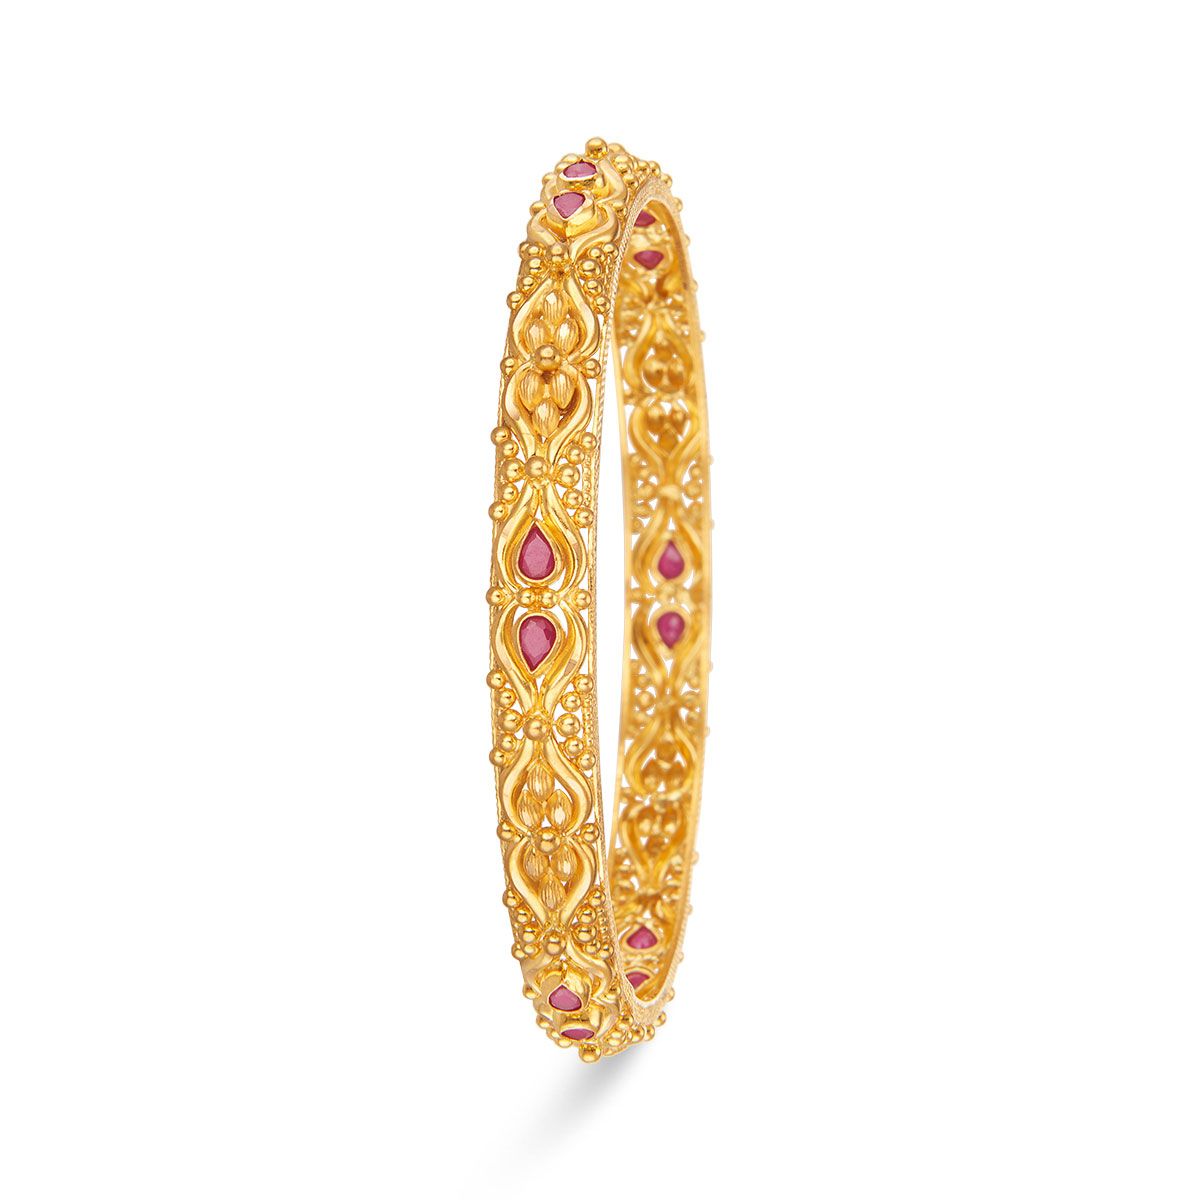 Buy latest Gold Bangles designs for men and womenLalithaa Jewellery